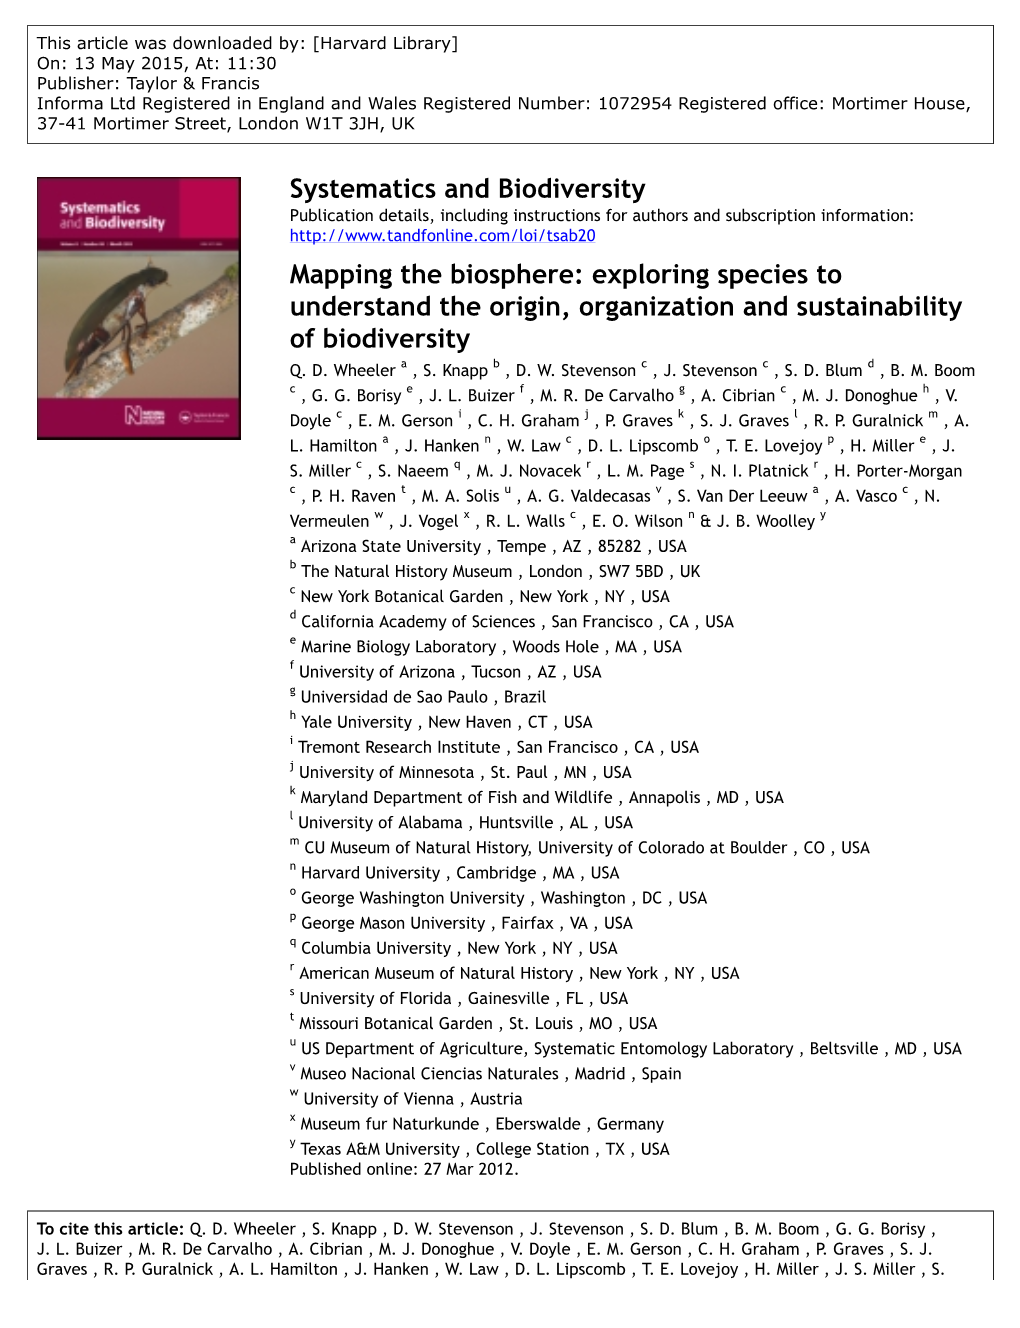 Systematics and Biodiversity Mapping the Biosphere: Exploring Species to Understand the Origin, Organization and Sustainability